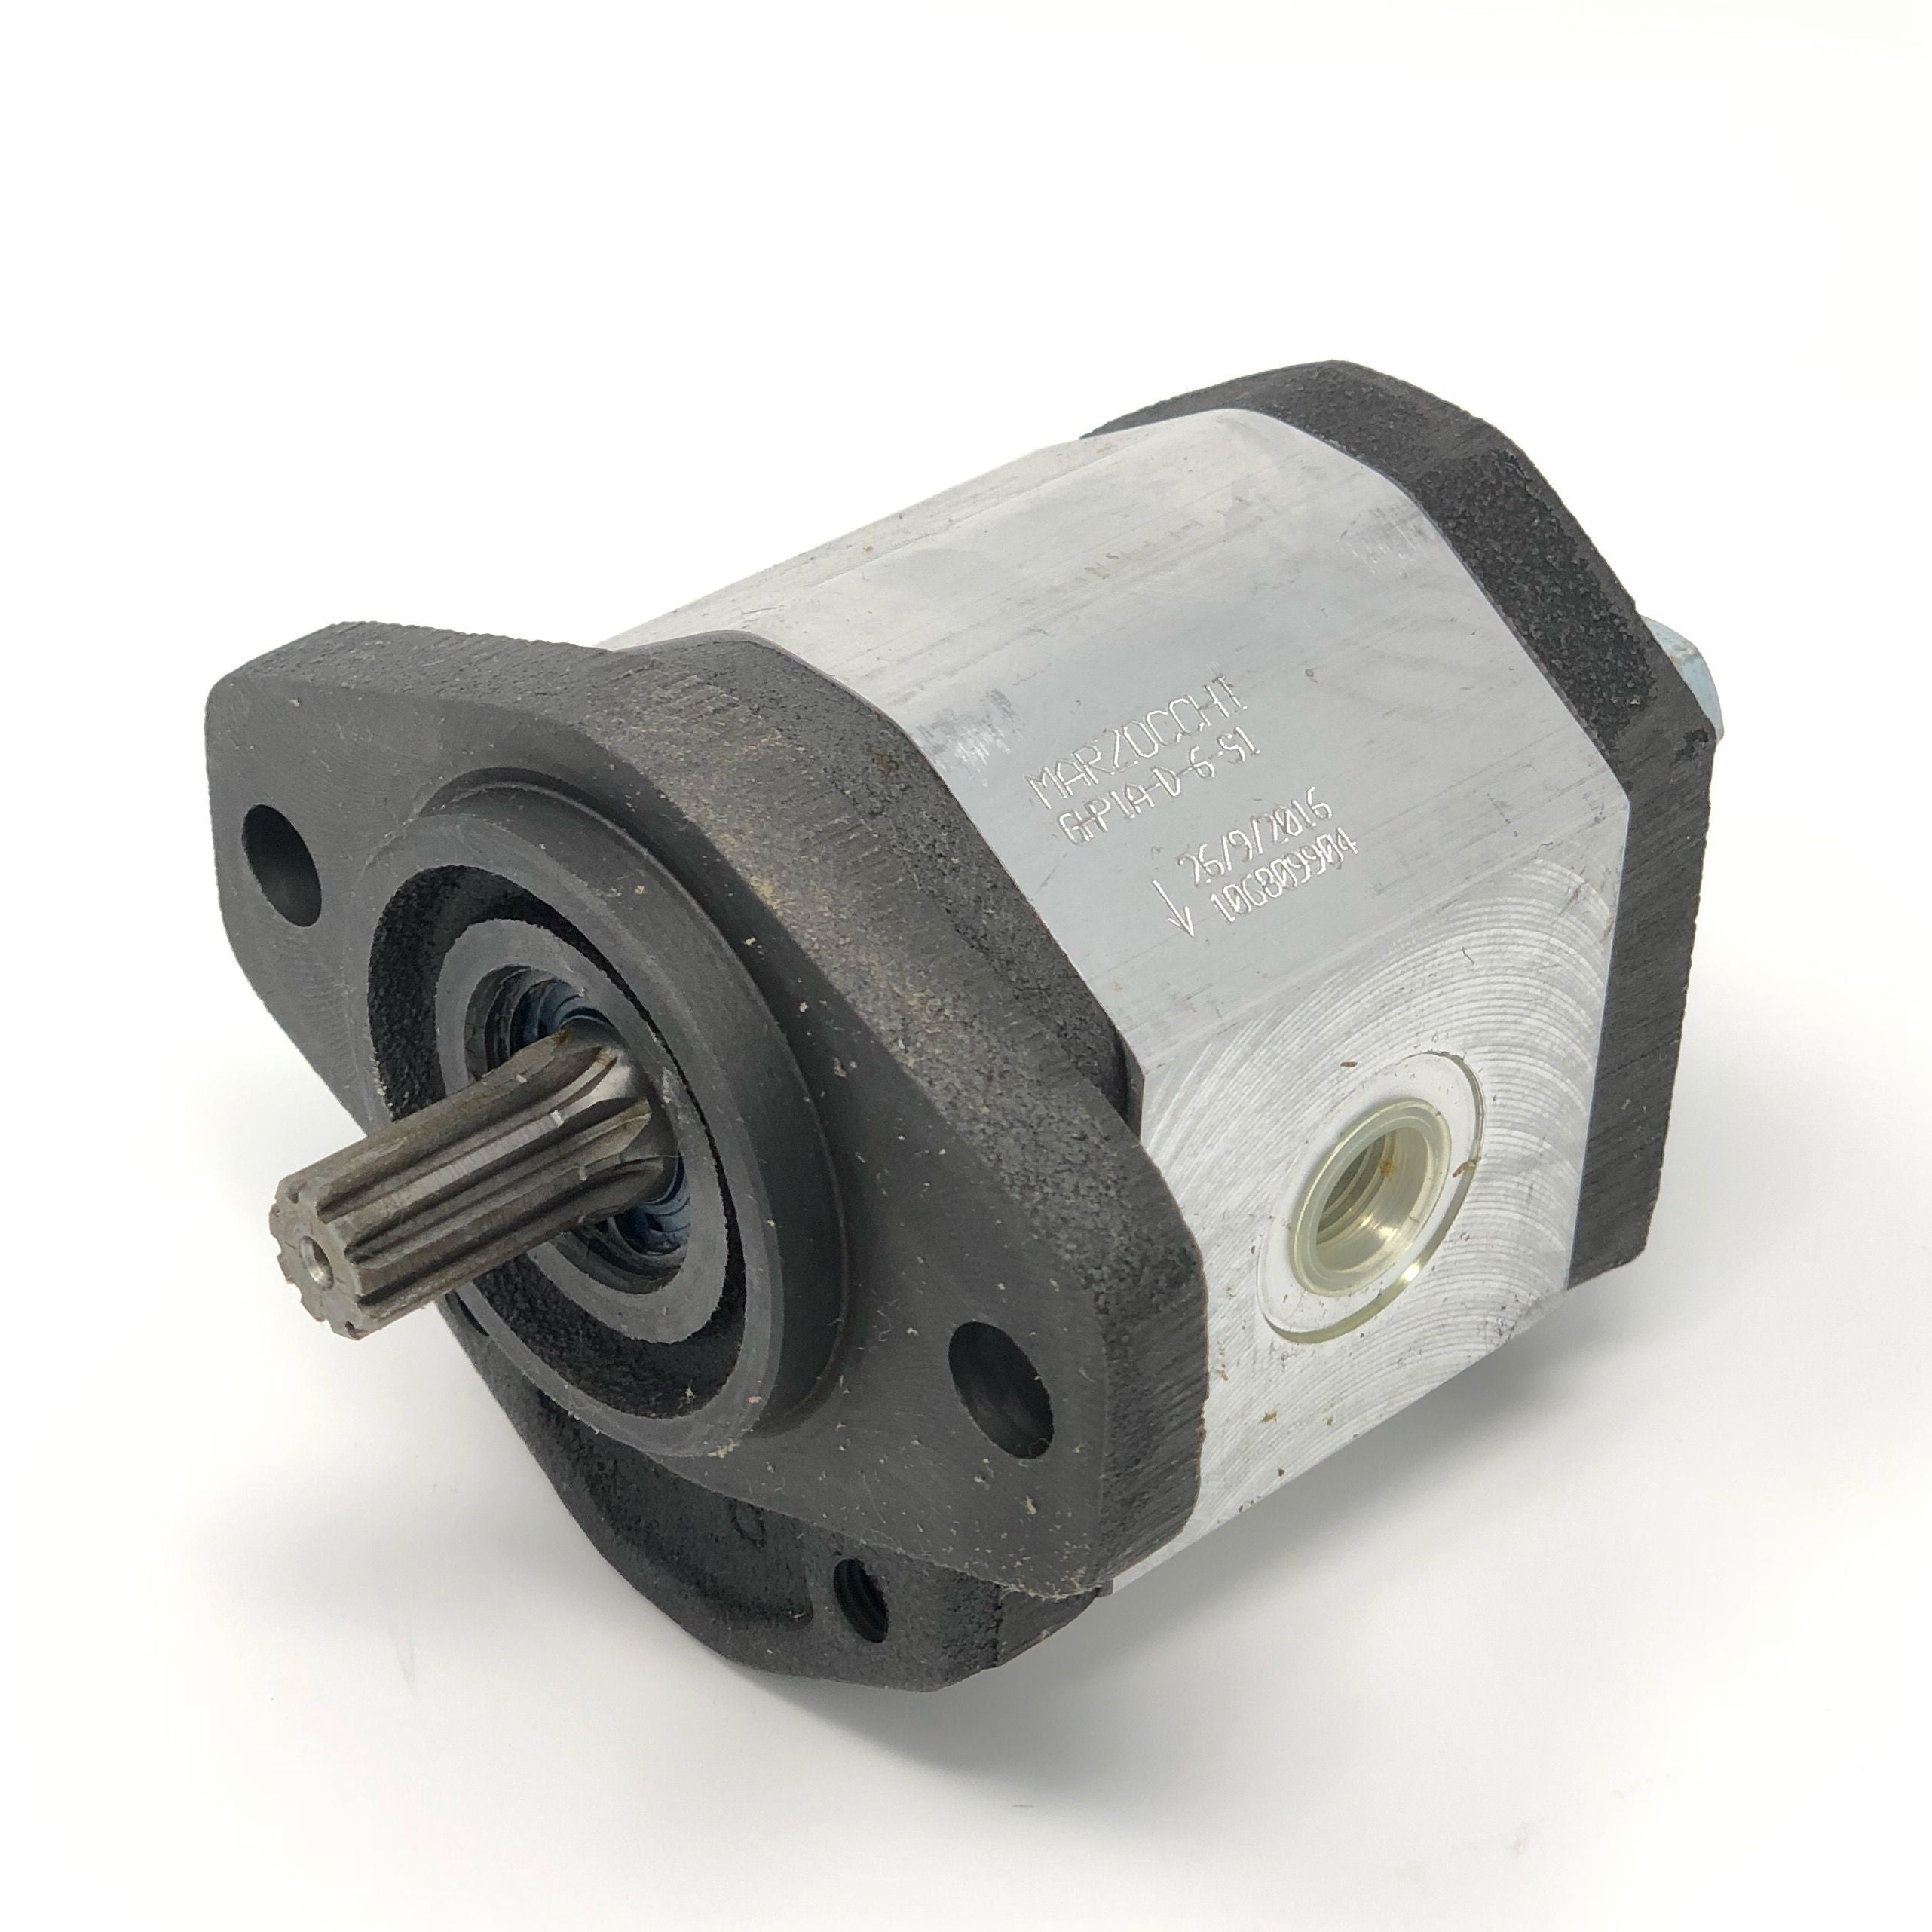 GHP1A-D-3-S1 : Marzocchi Gear Pump, CW, 2.1cc (0.1281in3), 1 GPM, 3915psi, 6000 RPM, #8 SAE (1/2") In, #6 SAE (3/8") Out, Splined Shaft 9T 20/40DP, SAE AA 2-Bolt Mount